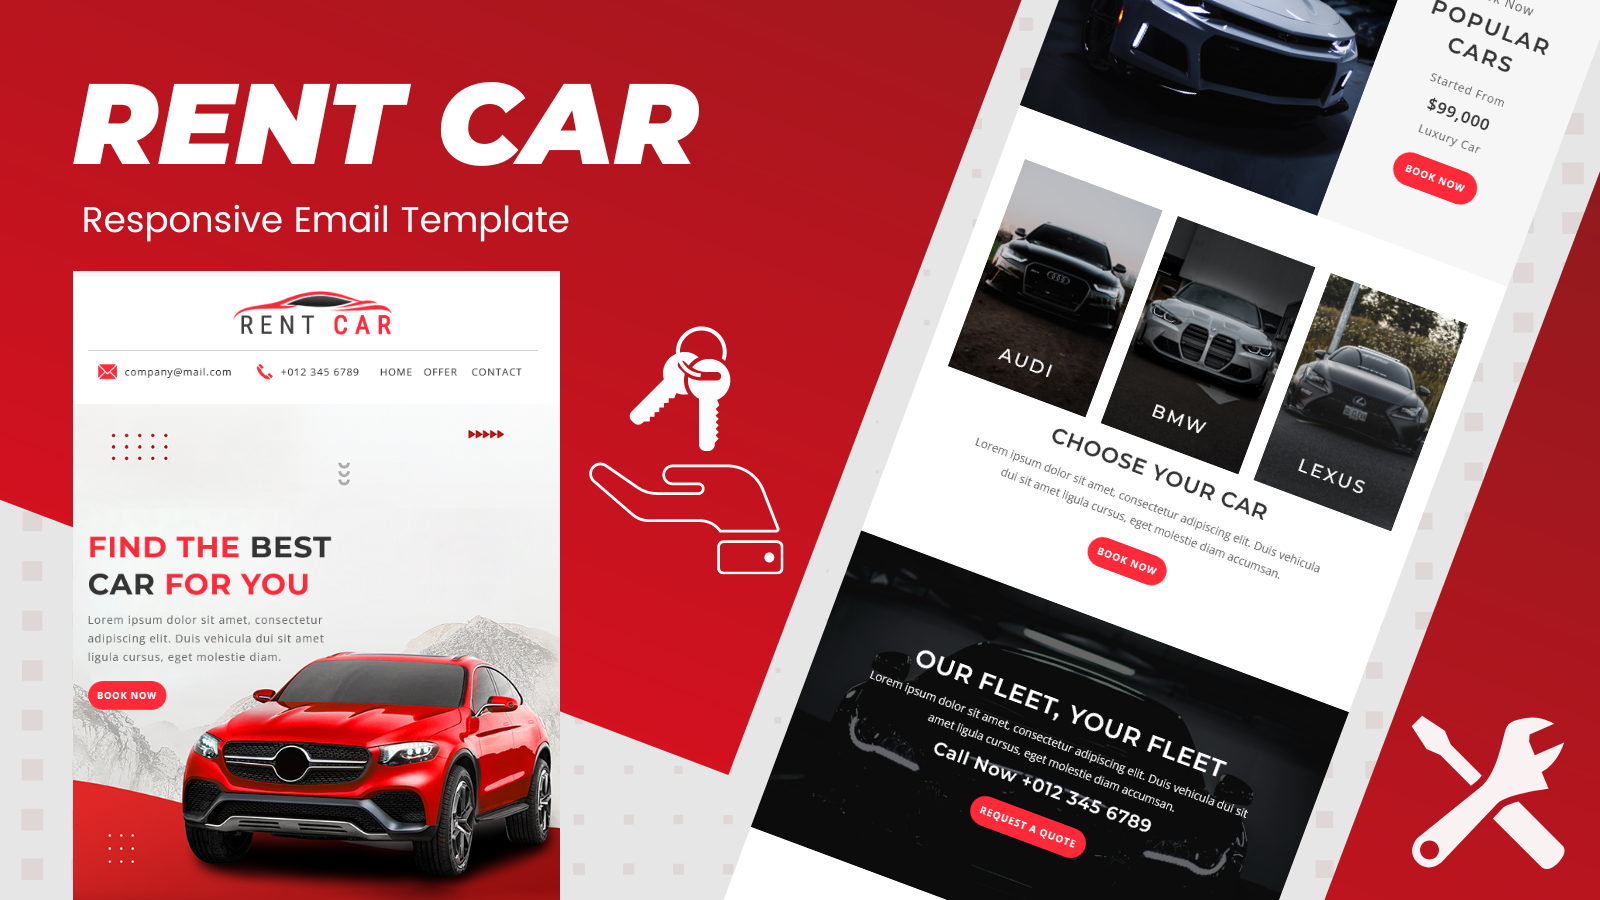 Rent Car – Responsive Email Template